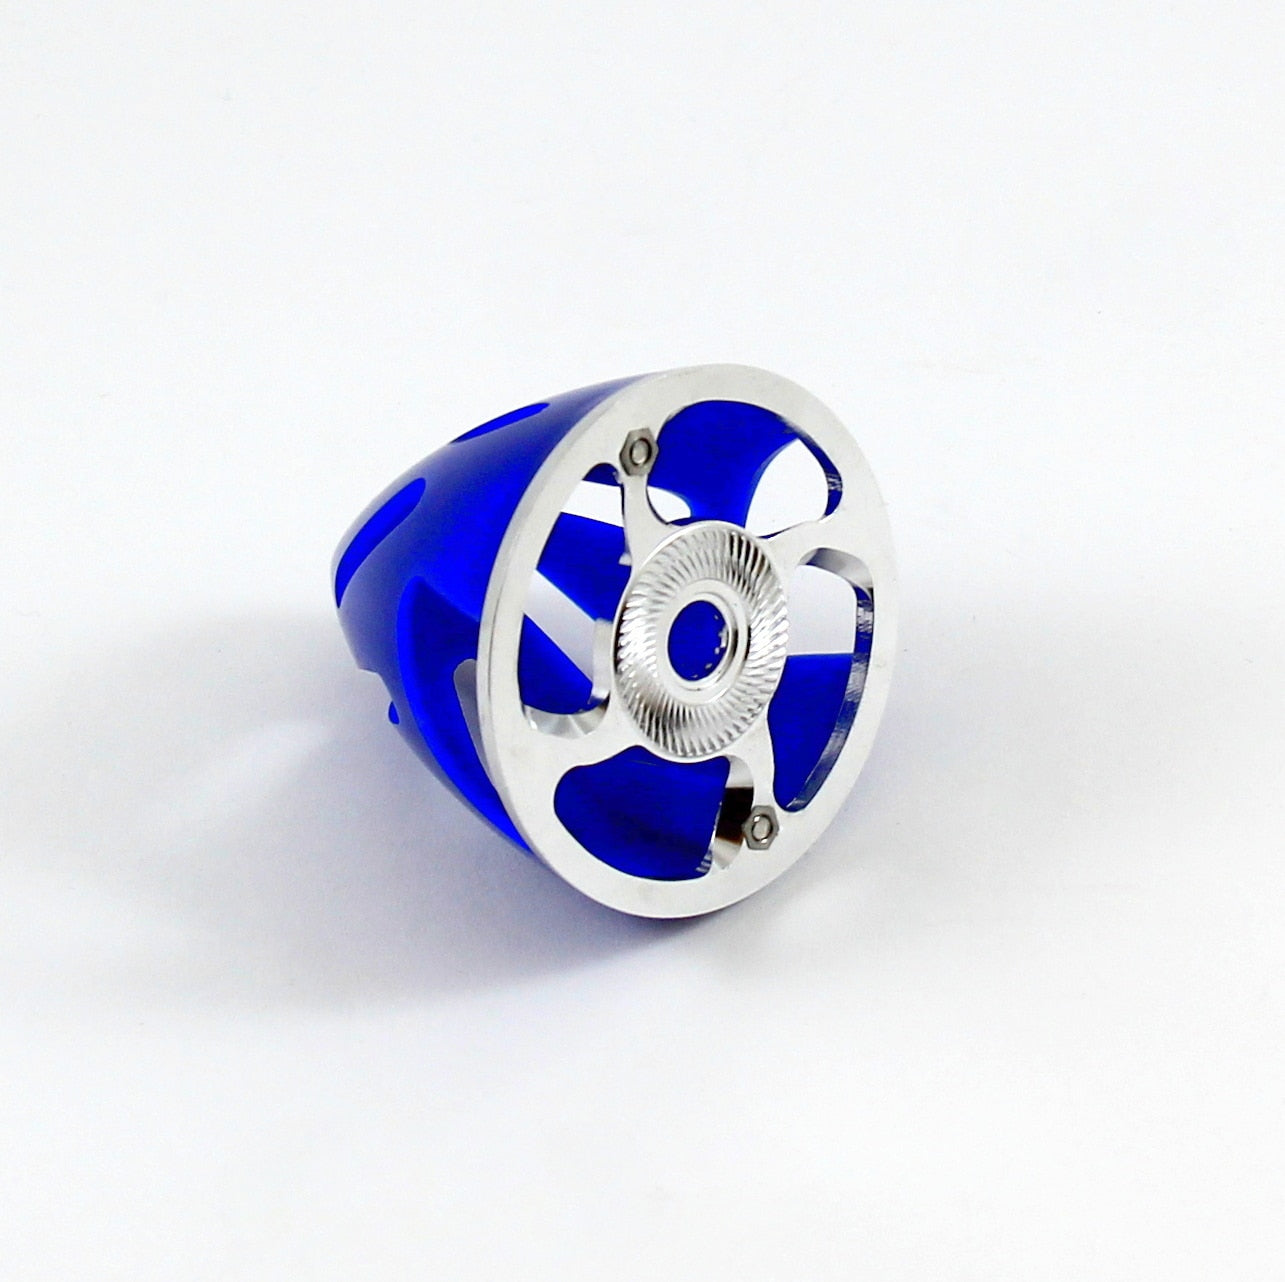 Kuza Vented Electric Spinner 2" / 51mm Blue KAG0201BLUE